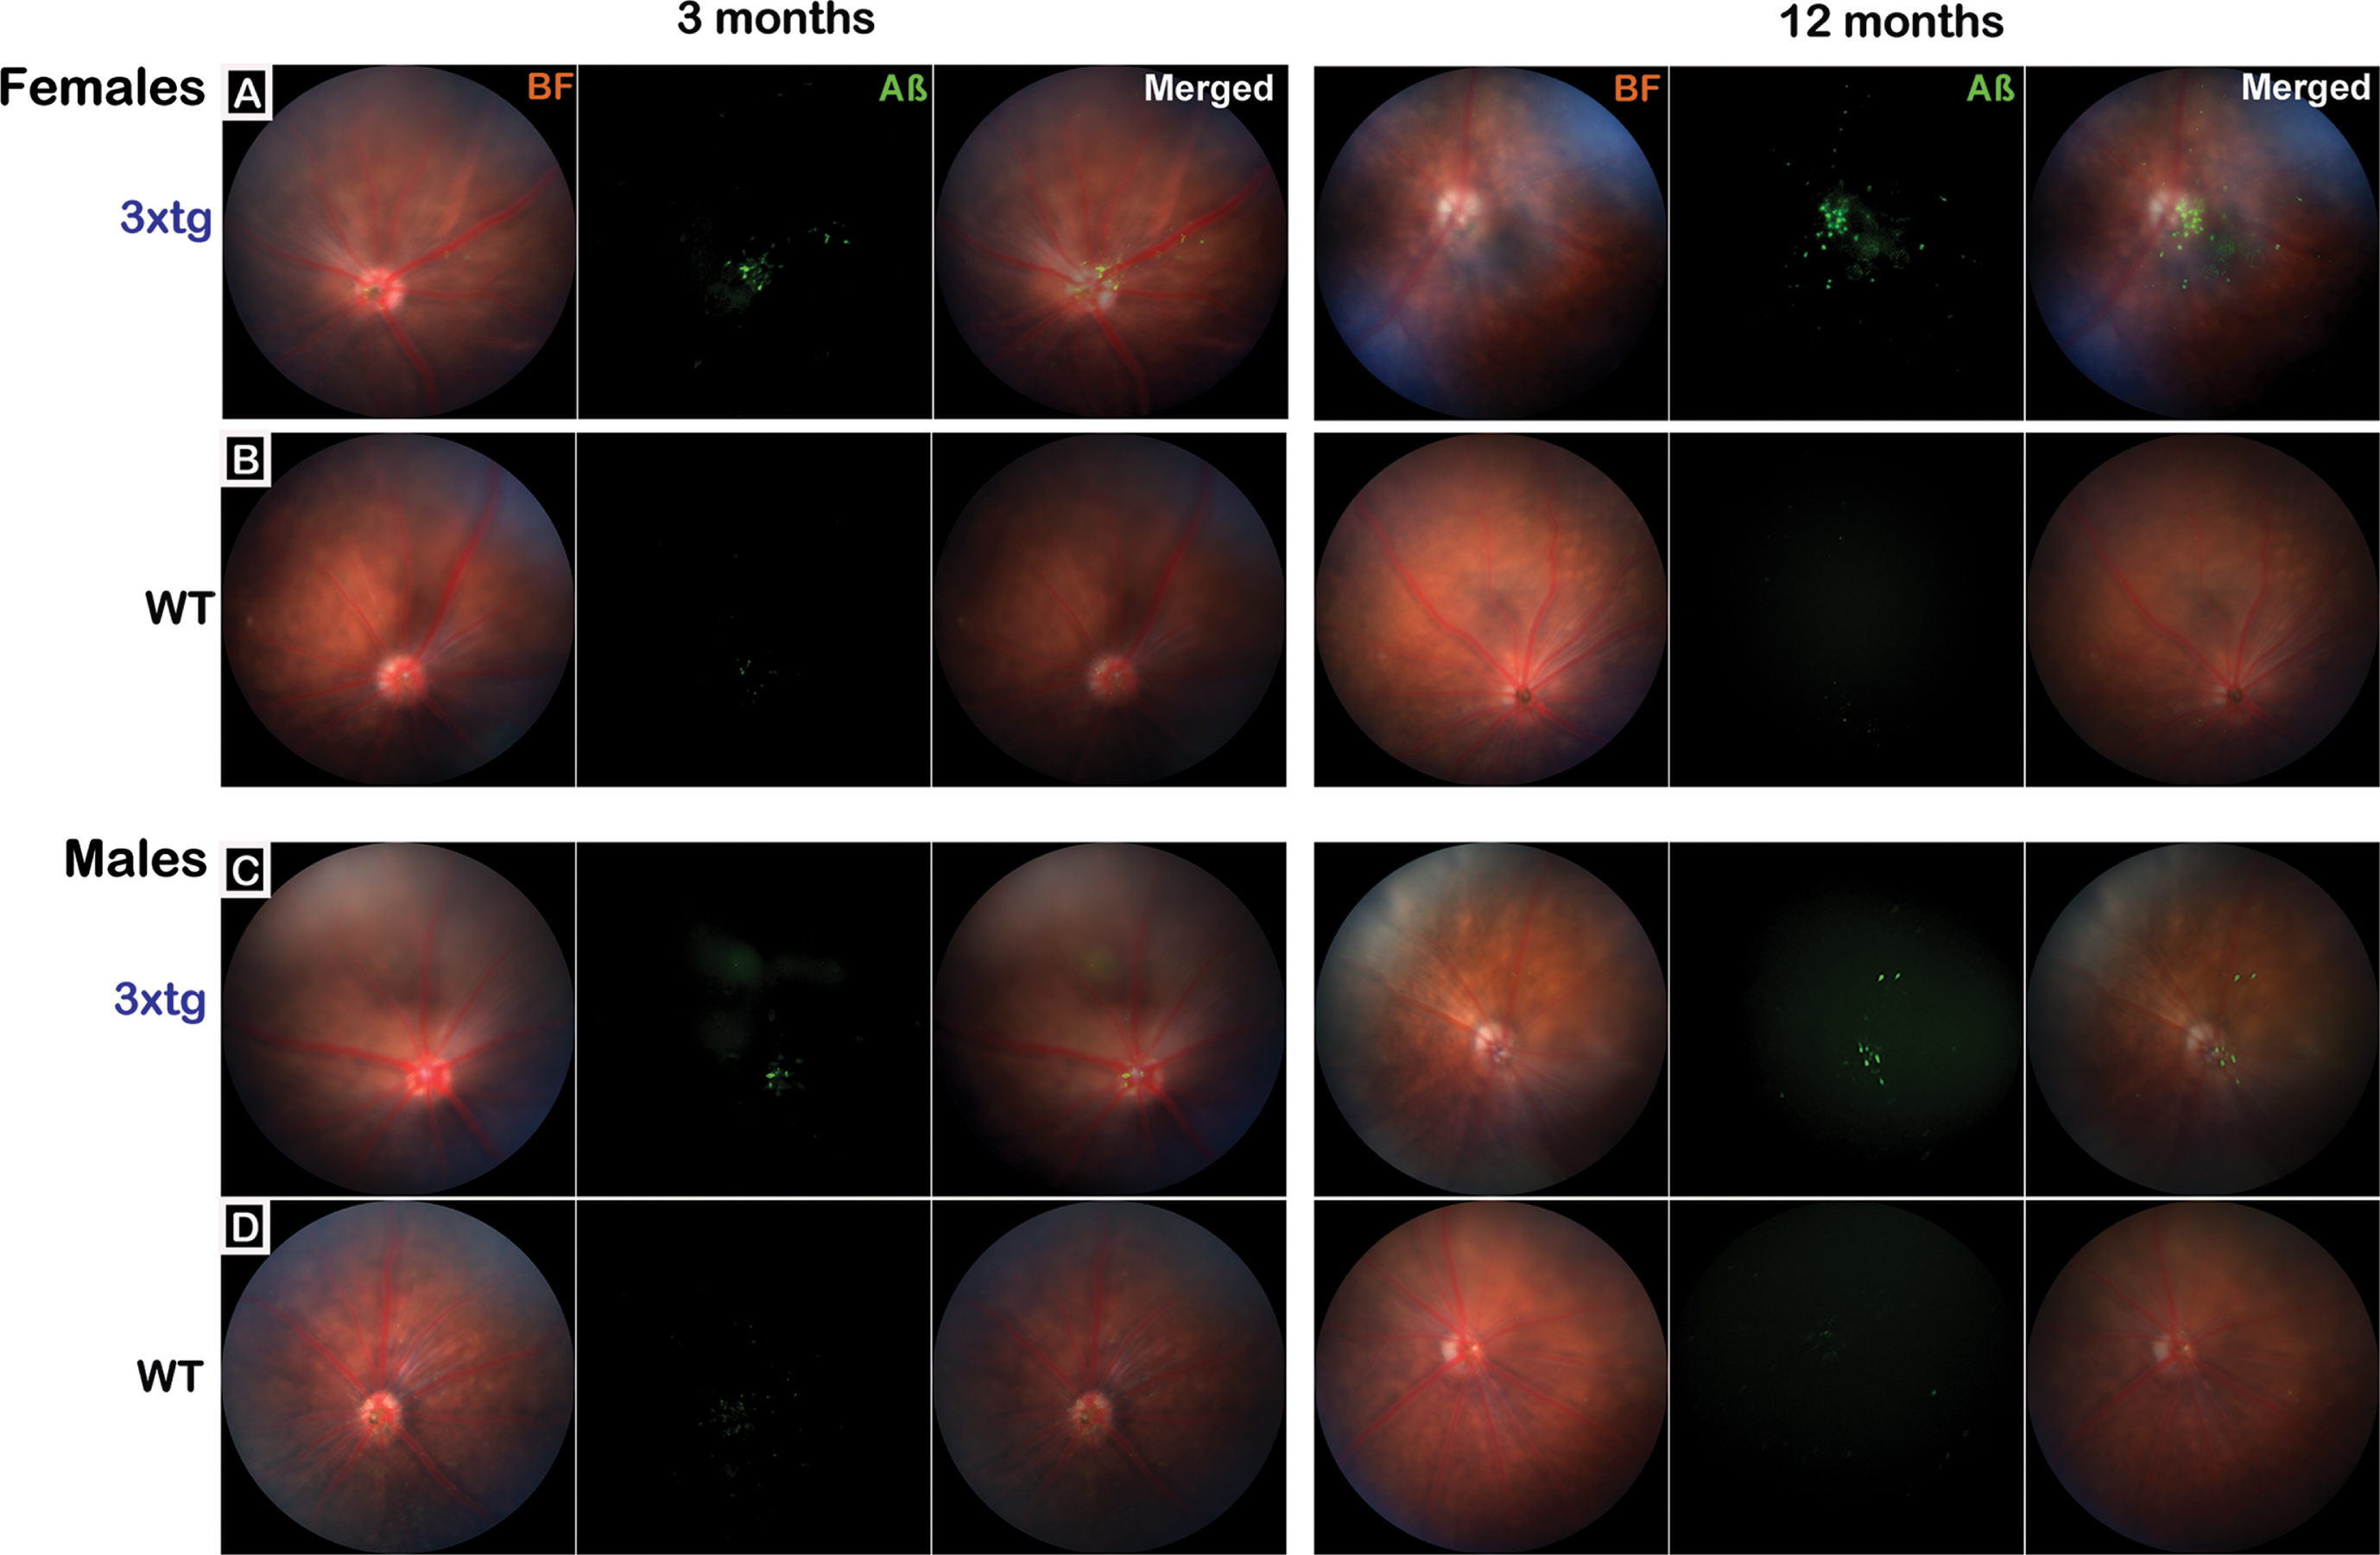 Visualization of retinal amyloid-β in 3xTg mice with in vivo ophthalmic imaging. The Micron IV ophthalmoscope was used to obtain representative retinal fundus images for baseline/early pathological stage (3 months) and pervasive pathological stage (12 months) 3xTg (rows A&C; n = 20 mice total; 10 mice/group) and age-matched wildtype (WT) C57BL/6J control mice (rows B&D; n = 20 mice total; 10 mice/group). Representative images from female (A&B) and male (C&D) mice from each genotype are presented. Brightfield (BF) images show retinal vasculature and optic disk; fluorescence (Aβ) images show signal detected after intravitreal injection of an AlexFluor-488 conjugated antibody that bound to retinal Aβ. Merged images overlay BF + Aβ. Images show that Aβ signal is detectable in 3xTg mice at 3 months of age but is more pronounced at 12 months (rows A&C). While present in both sexes, Aβ signal appears more abundant in female 3xTg mice. In merged images, Aβ can be seen distributed largely around the optic disc and vasculature with additional deposits in the periphery. No Aβ signal above background was detected in wildtype mouse retina (rows B&D).